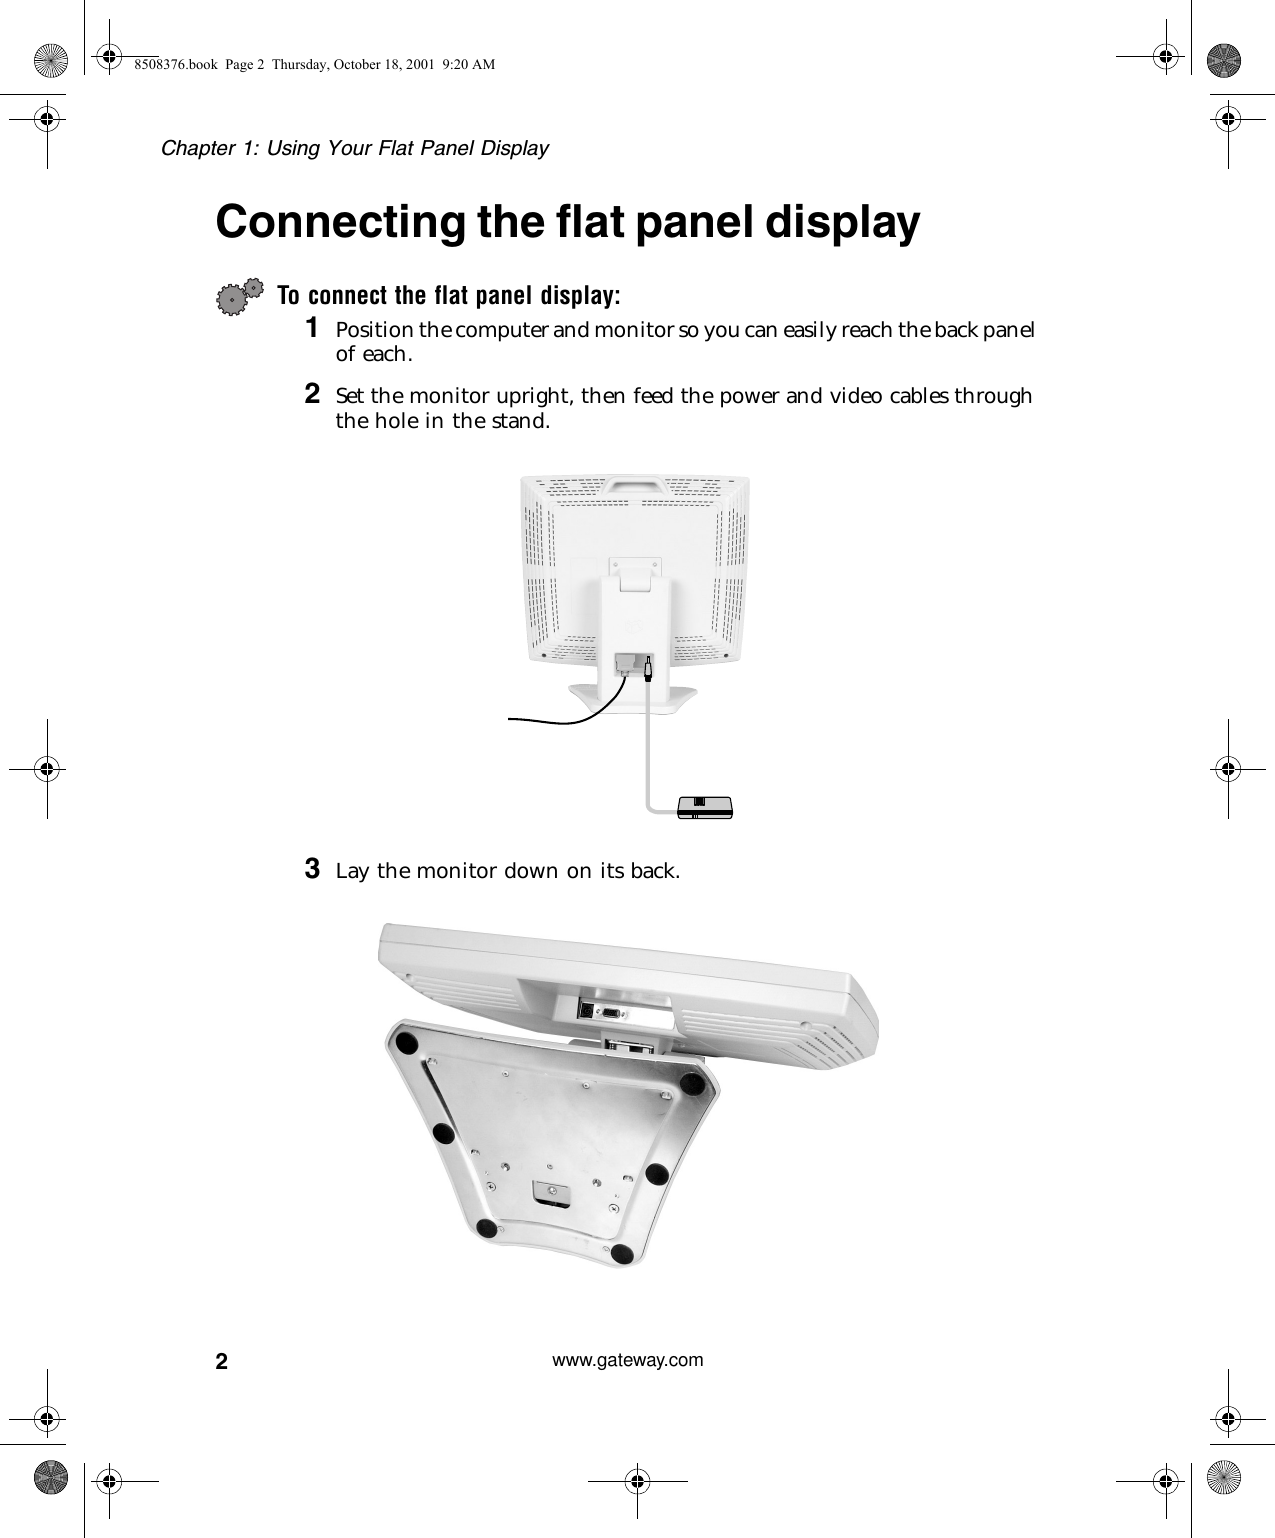 2Chapter 1: Using Your Flat Panel Displaywww.gateway.comConnecting the flat panel displayTo connect the flat panel display:1Position the computer and monitor so you can easily reach the back panel of each.2Set the monitor upright, then feed the power and video cables through the hole in the stand.3Lay the monitor down on its back.8508376.book  Page 2  Thursday, October 18, 2001  9:20 AM